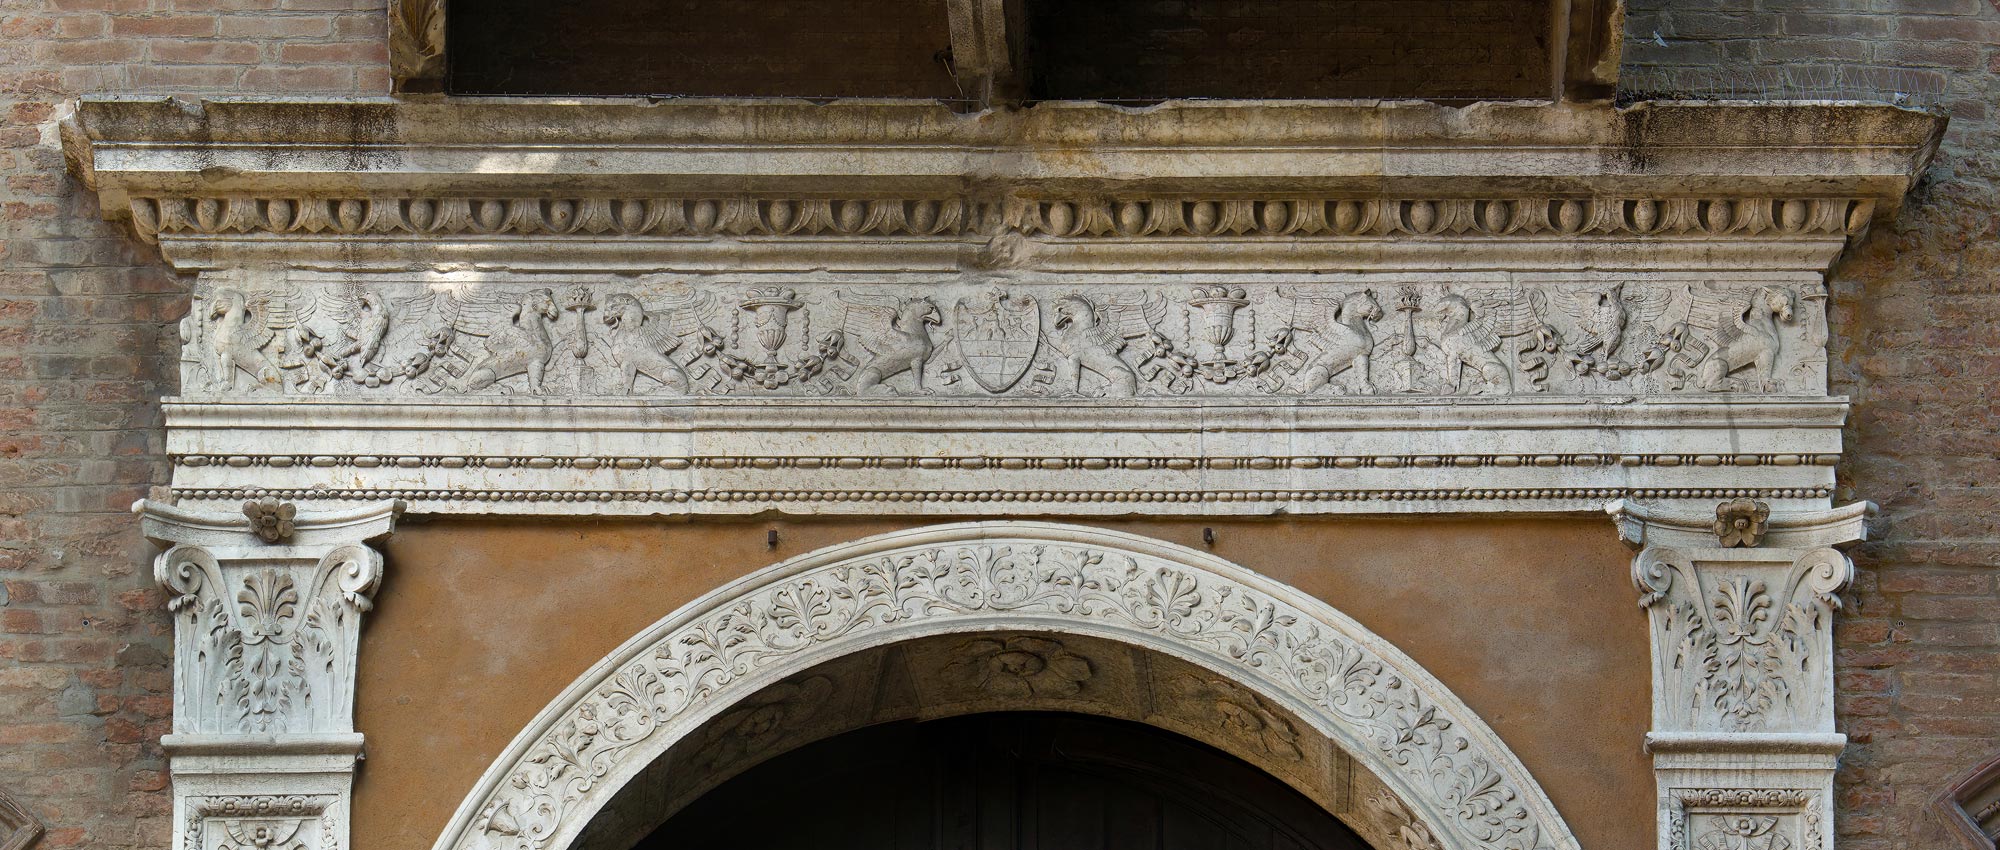 The frieze carved into the entablature.